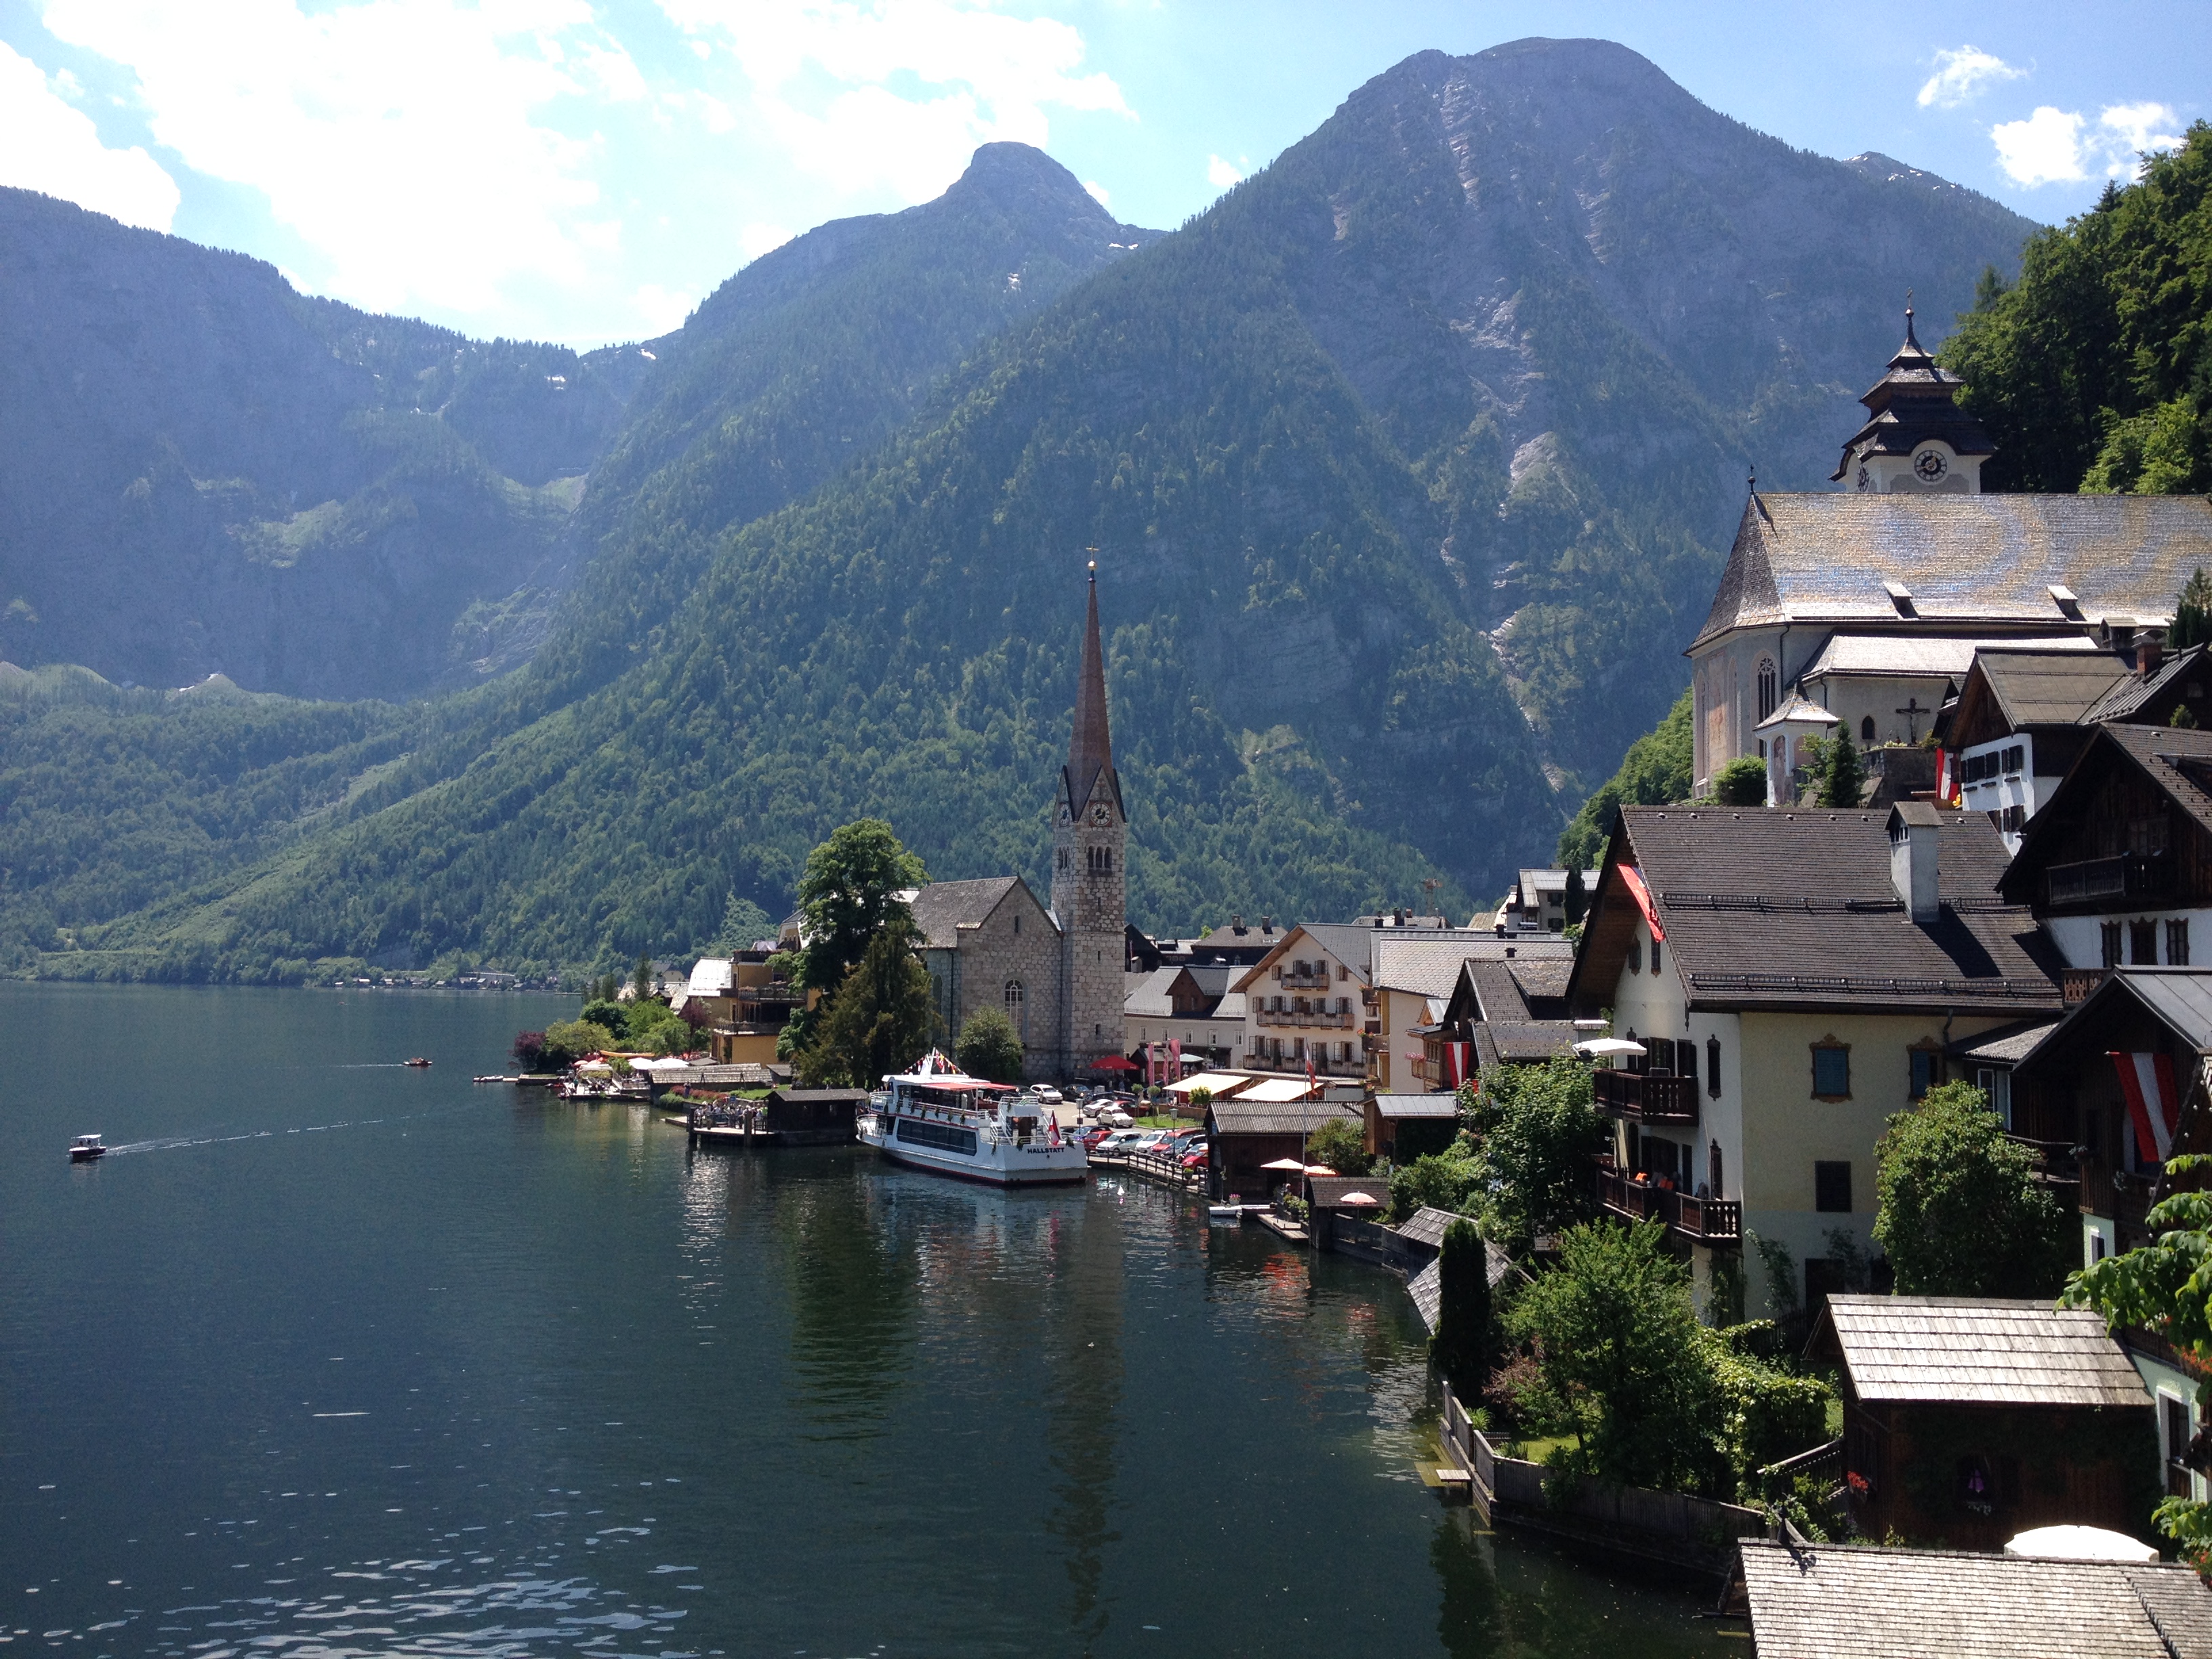 Second Prize (selected by votes at UR International display): This is the town of Hallstatt in Upper Austria. It sits right on the lake and the traditional Austrian culture can be felt here. The day we visited there was a national holiday and there were many decorated boats and swans on the water. The natural beauty is breathtaking. Photo submitted by Ashley Moran who took these pictures while studying abroad in Graz, Austria last semester through the ISEP exchange program.